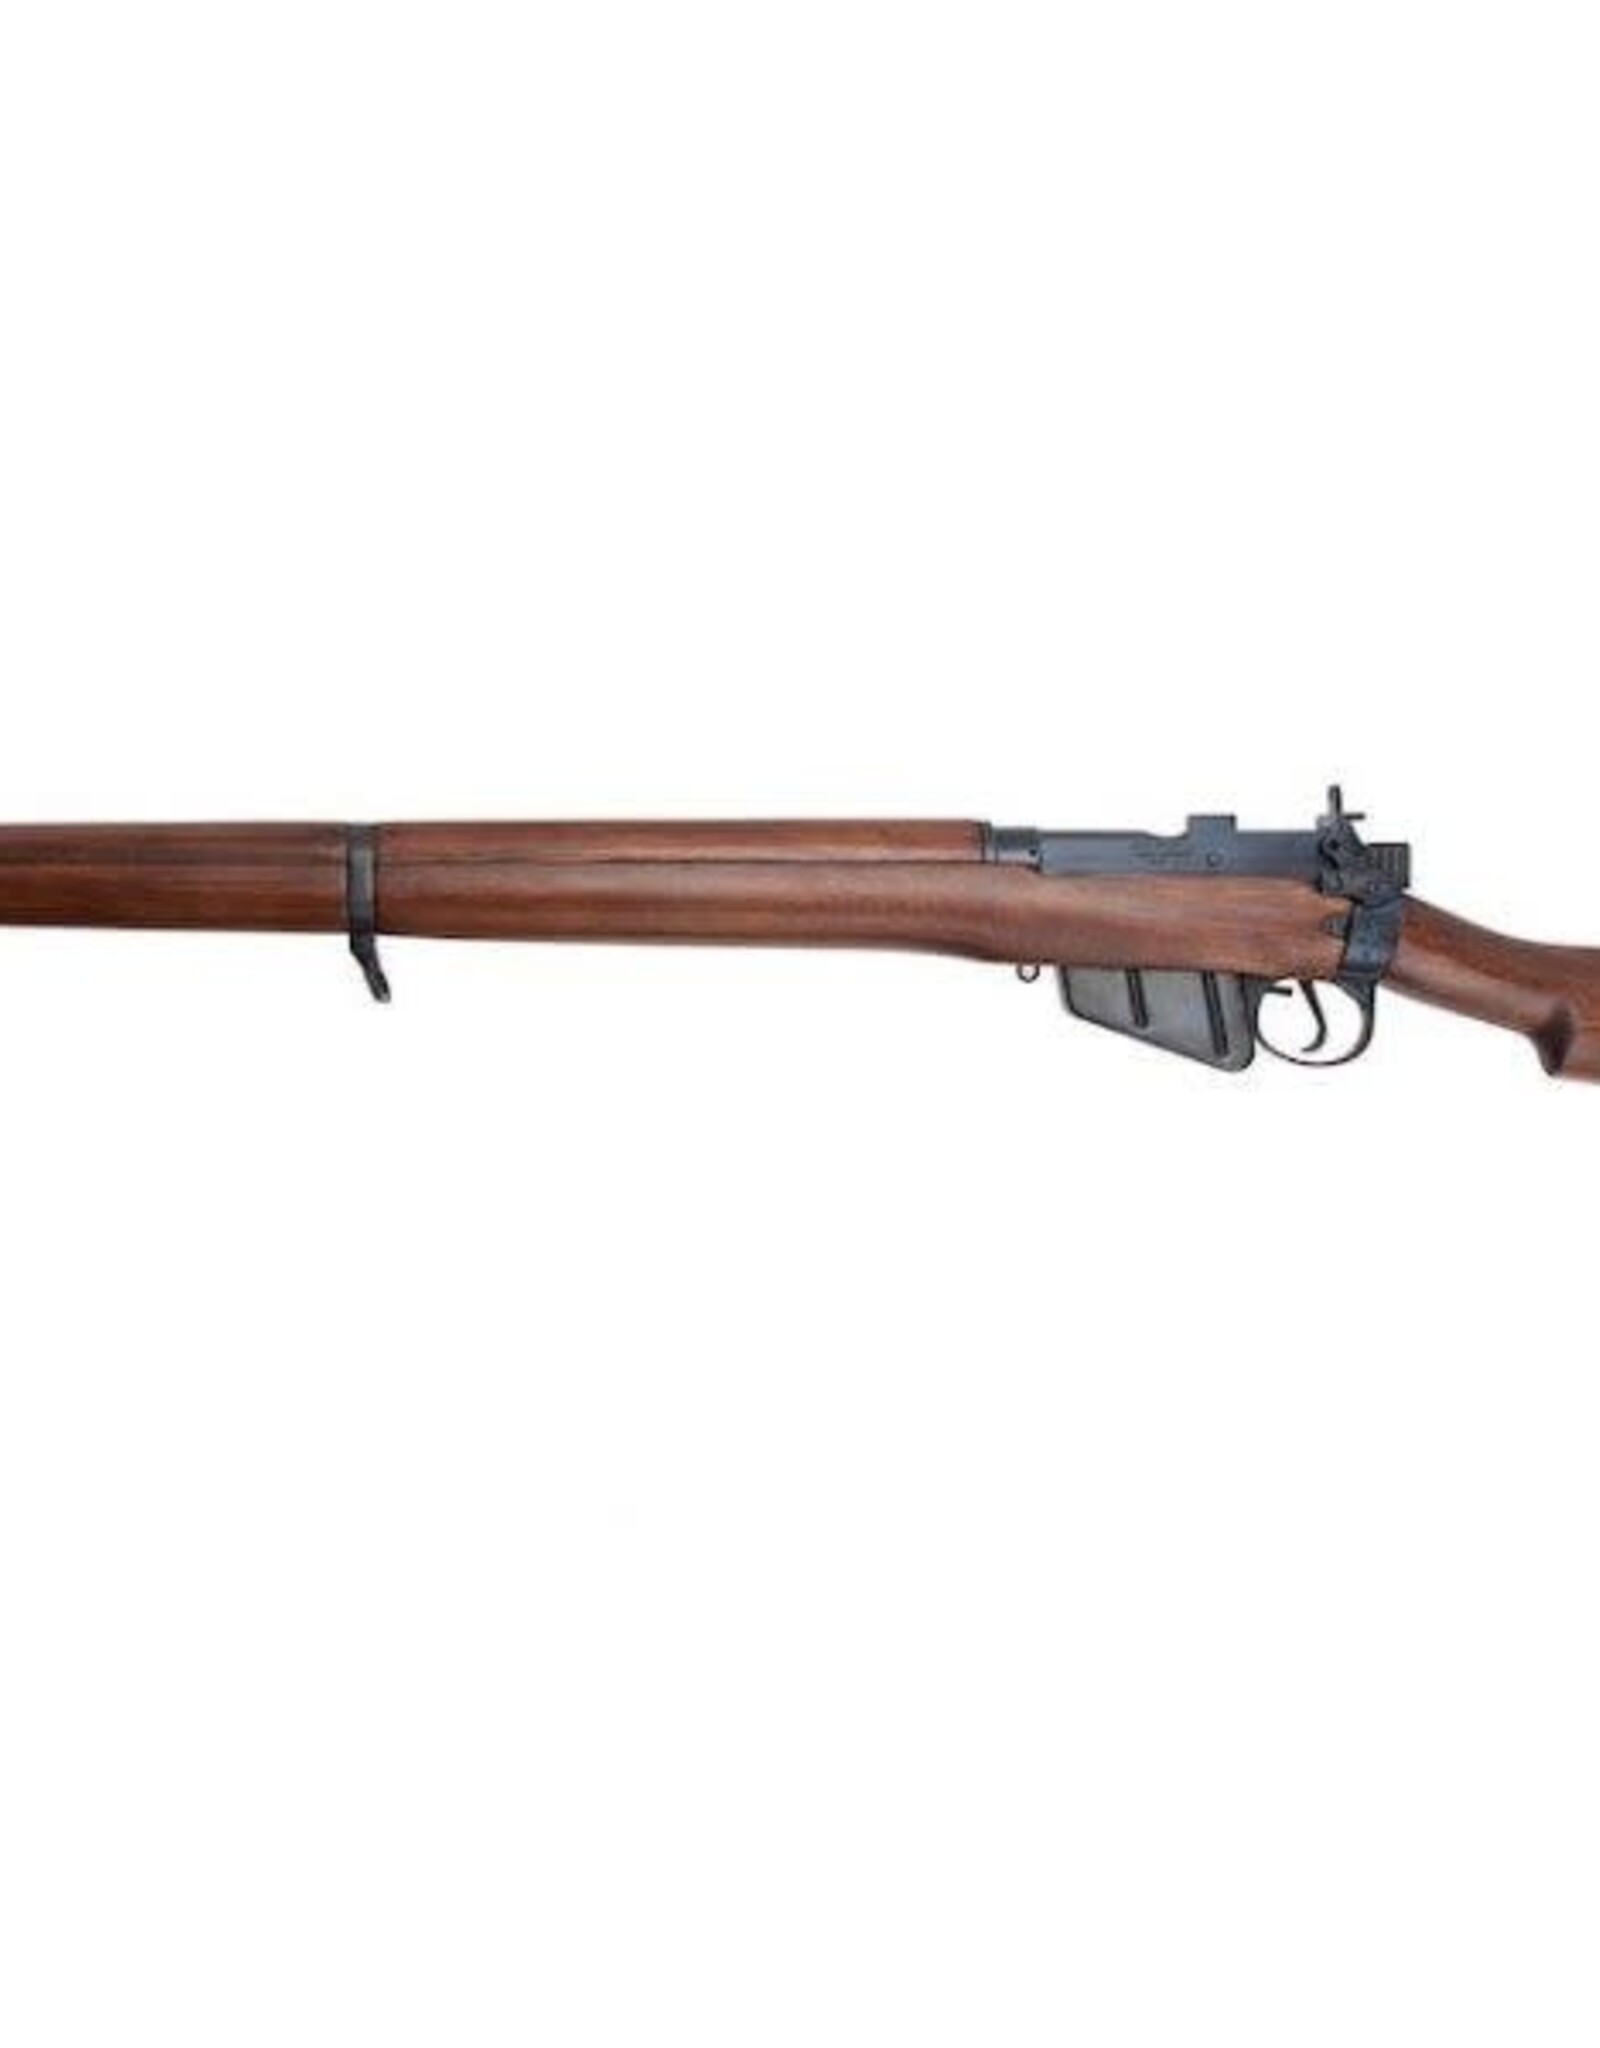 Ares Ares Classic Line Lee Enfield SMLE British No. 4 MK1